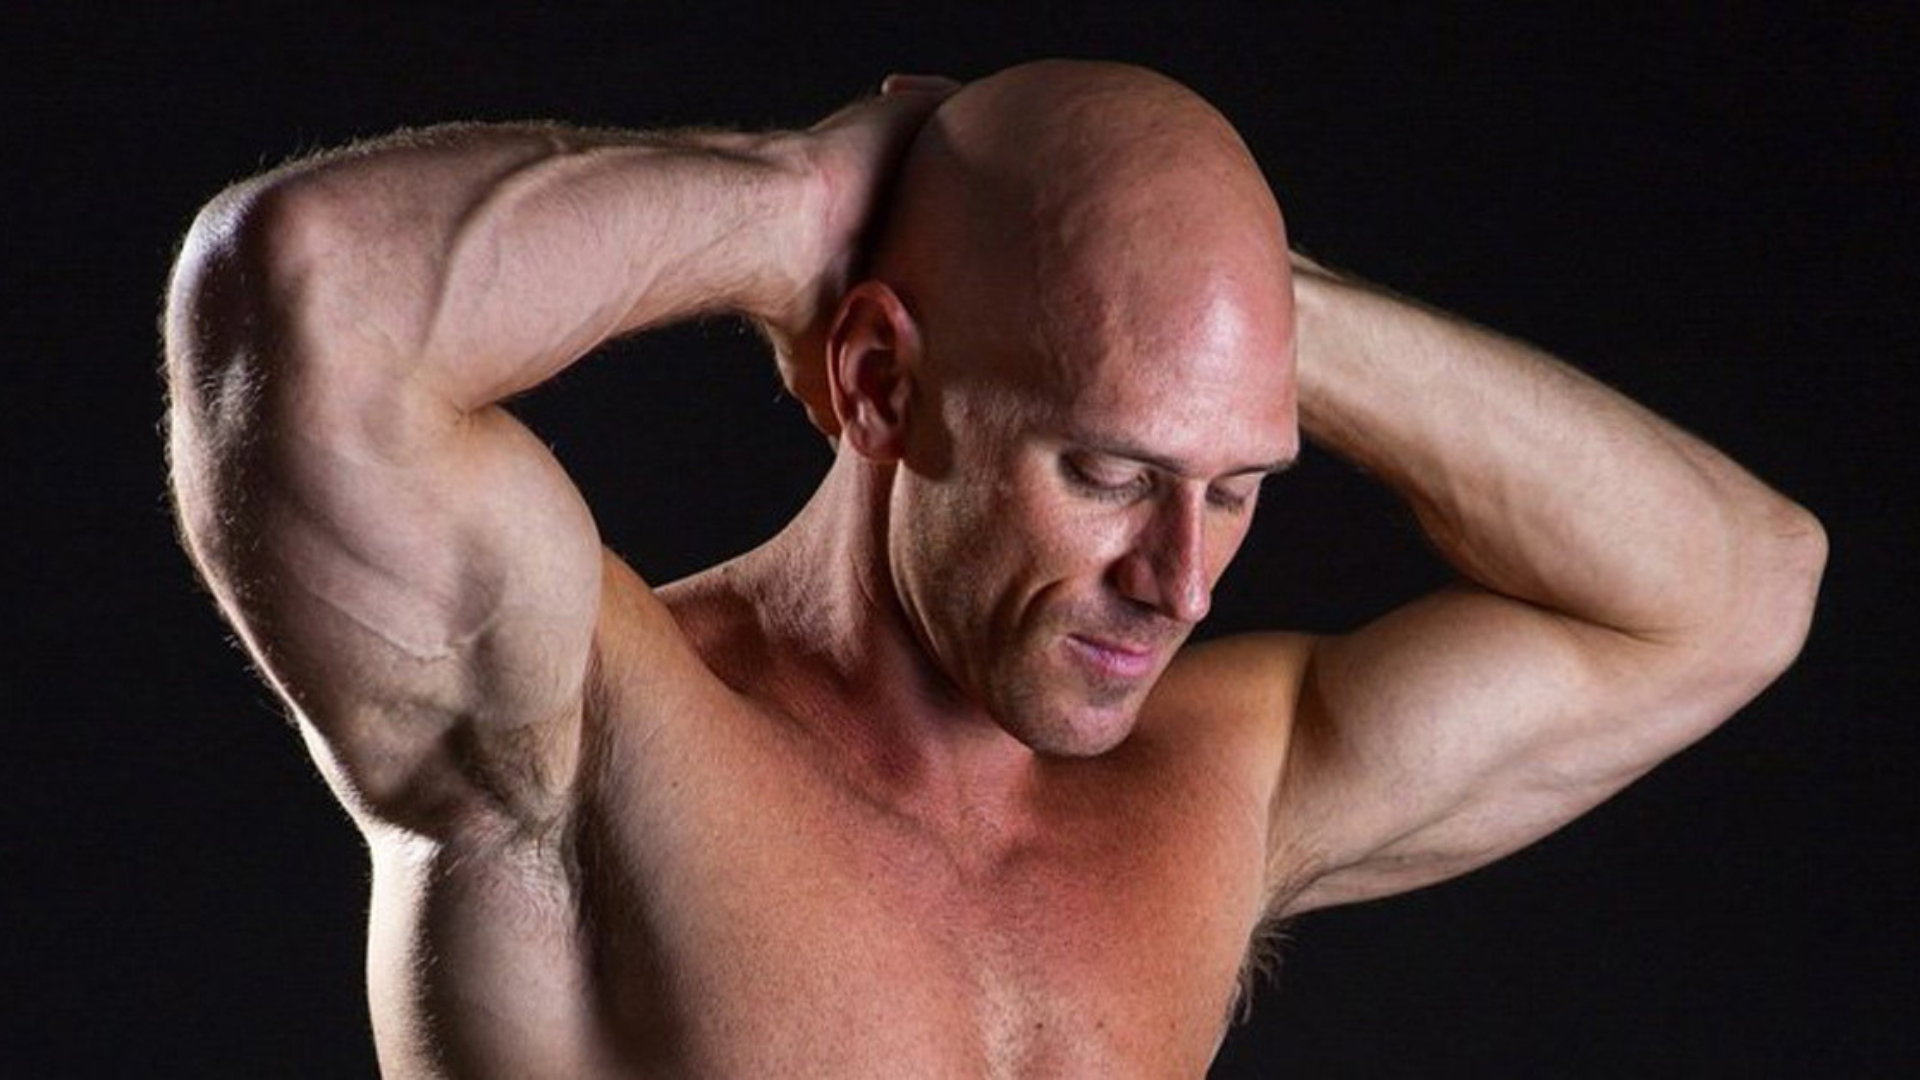 Johnny Sins without shirt with his hands on his head